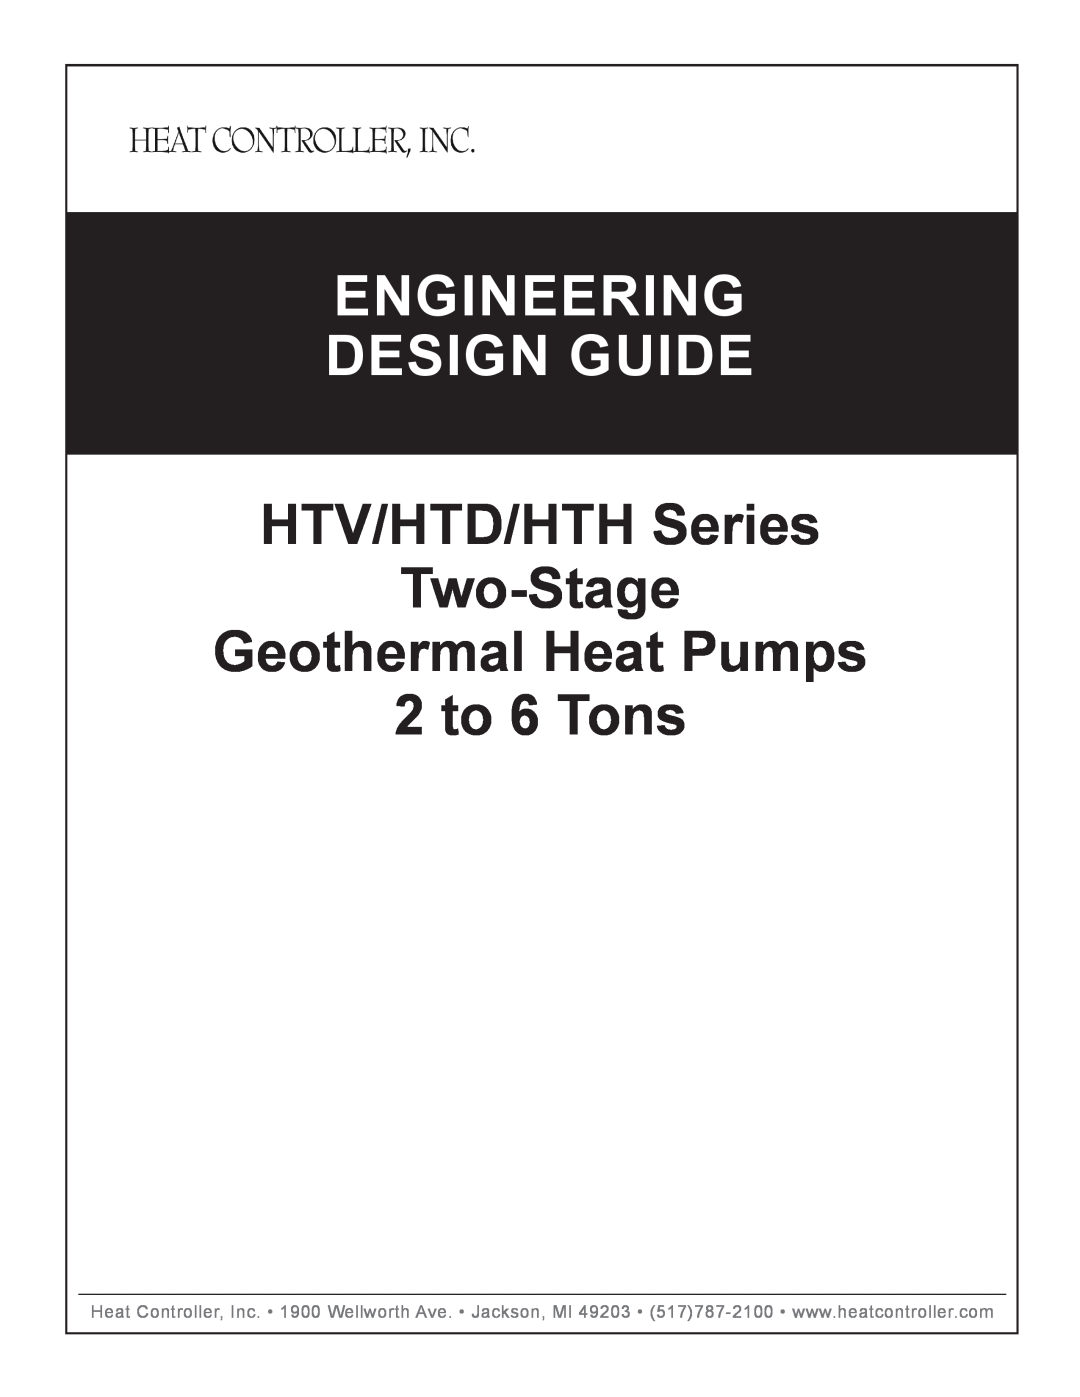 Heat Controller HTH SERIES, HTD SERIES, HTV SERIES manual Engineering Design Guide, HTV/HTD/HTH Series Two-Stage 